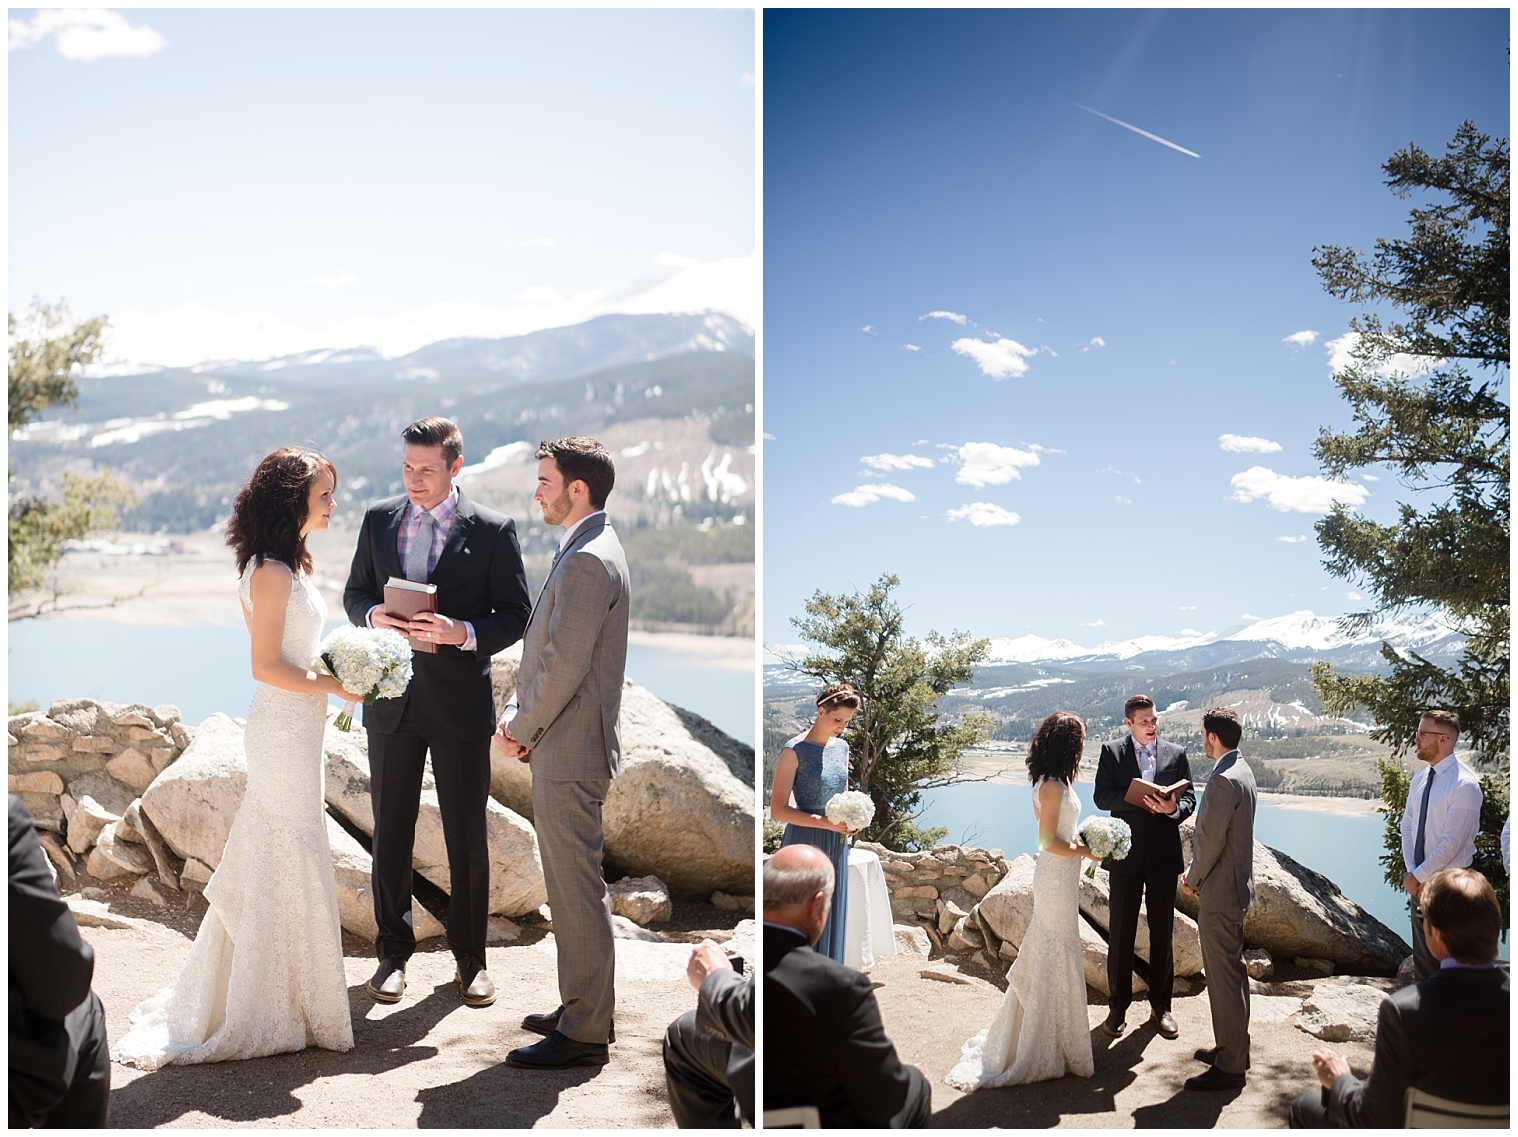 Wedding couple are married at an intimate ceremony in the Colorado mountains.